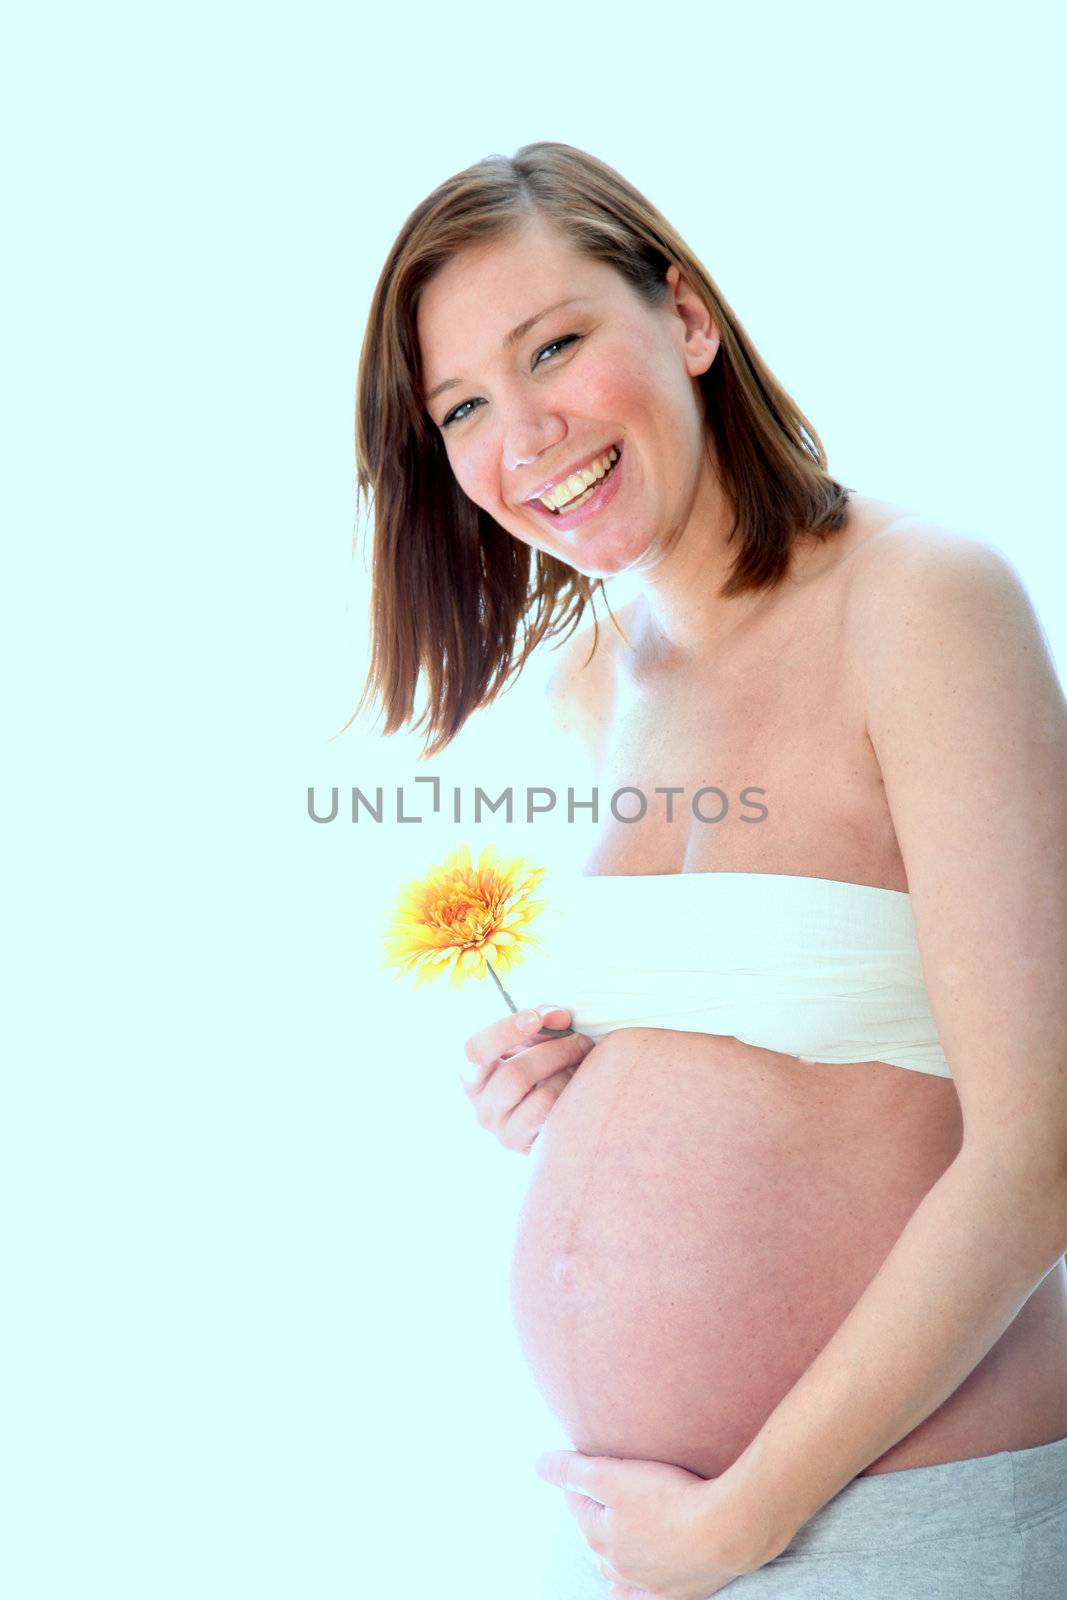 pregnant, smiling, happy woman with a baby belly looks toward the camera and holding a flower
 